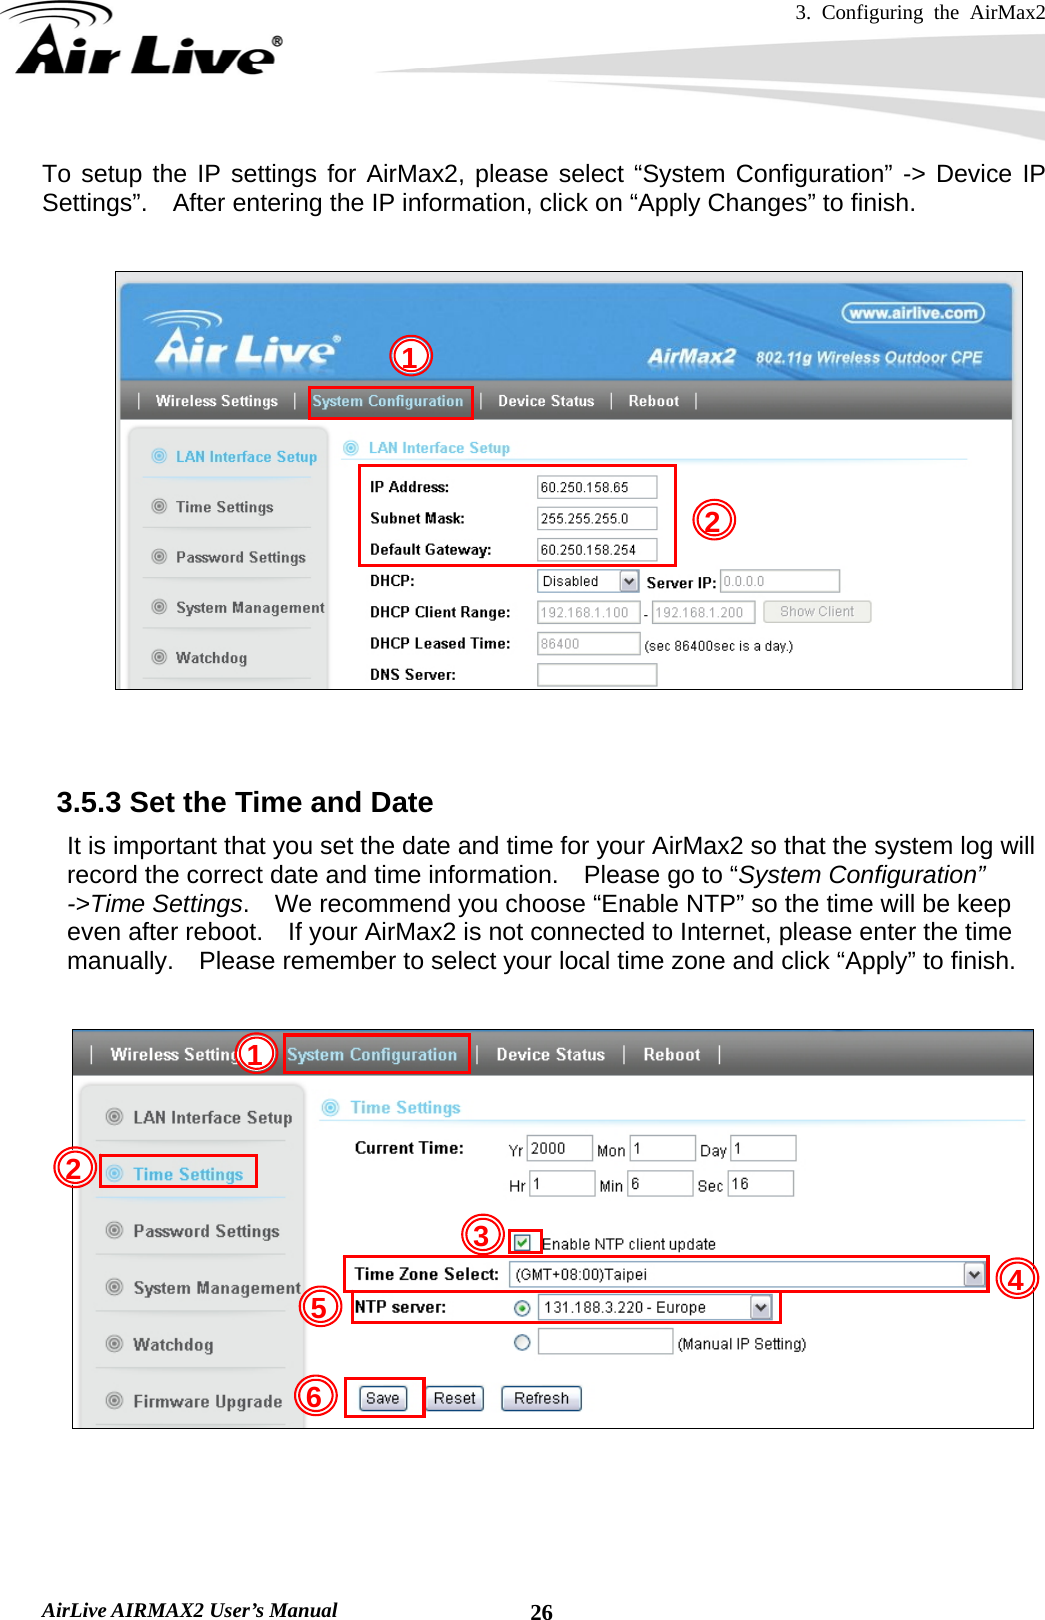 3. Configuring the AirMax2   AirLive AIRMAX2 User’s Manual  26To setup the IP settings for AirMax2, please select “System Configuration” -&gt; Device IP Settings”.    After entering the IP information, click on “Apply Changes” to finish.     3.5.3 Set the Time and Date     It is important that you set the date and time for your AirMax2 so that the system log will record the correct date and time information.  Please go to “System Configuration” -&gt;Time Settings.    We recommend you choose “Enable NTP” so the time will be keep even after reboot.    If your AirMax2 is not connected to Internet, please enter the time manually.    Please remember to select your local time zone and click “Apply” to finish.        1 25  432 1 6 